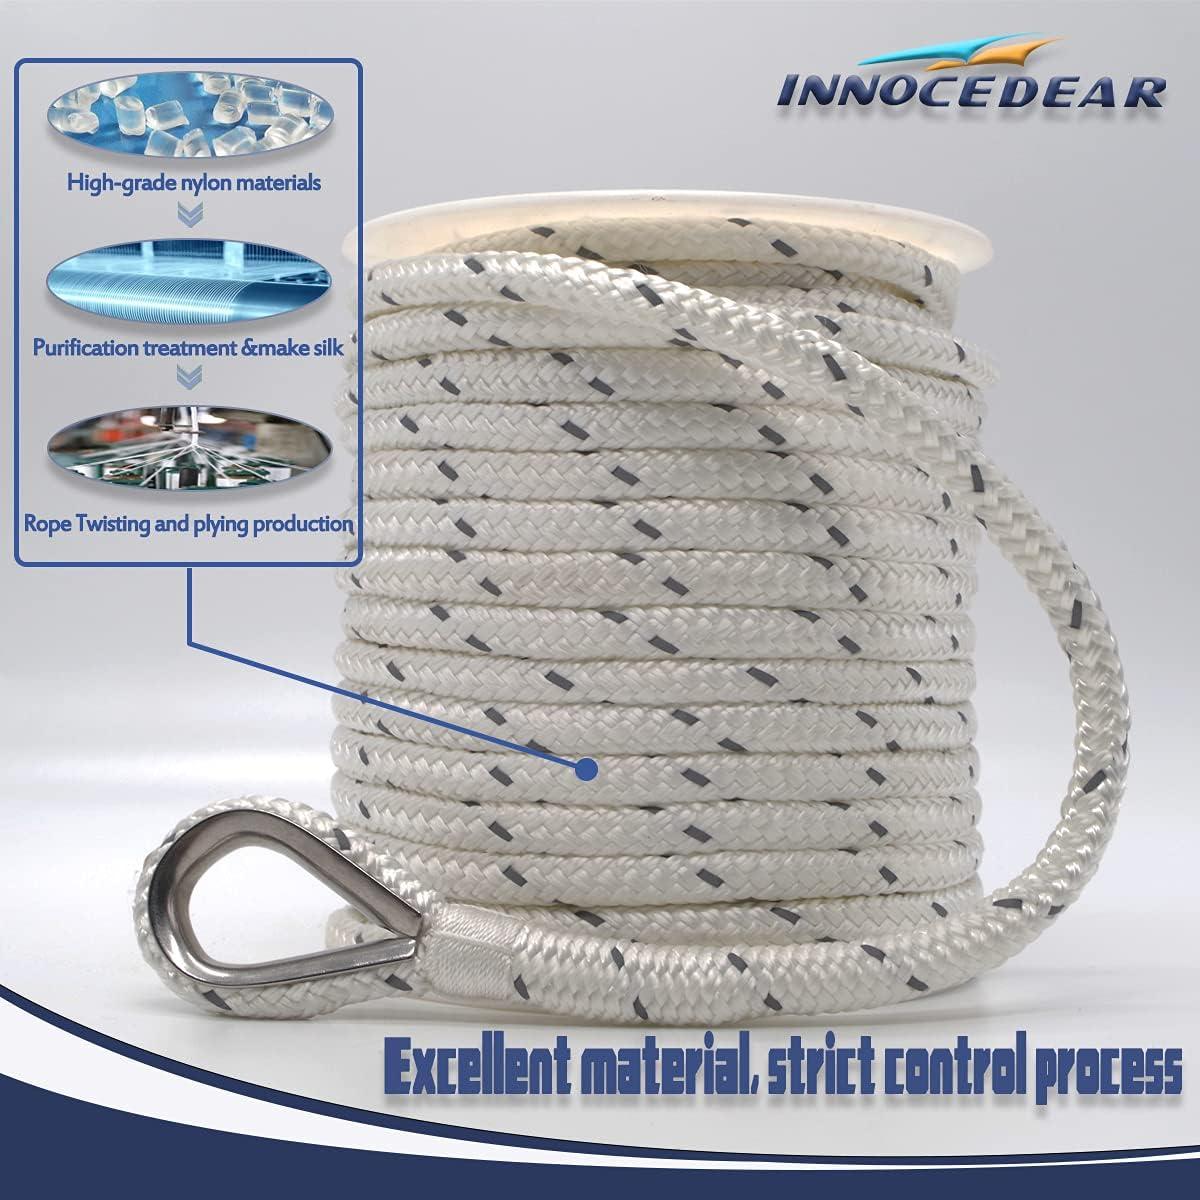 INNOCEDEAR Double Braided Nylon Anchor Rope(White Reflective, 3/8 x 100', 1/2 150') Anchor Line/Boat Anchor Rope with Stainless Steel Thimble,  Quality Marine Rope, Boat Accessories 100FT